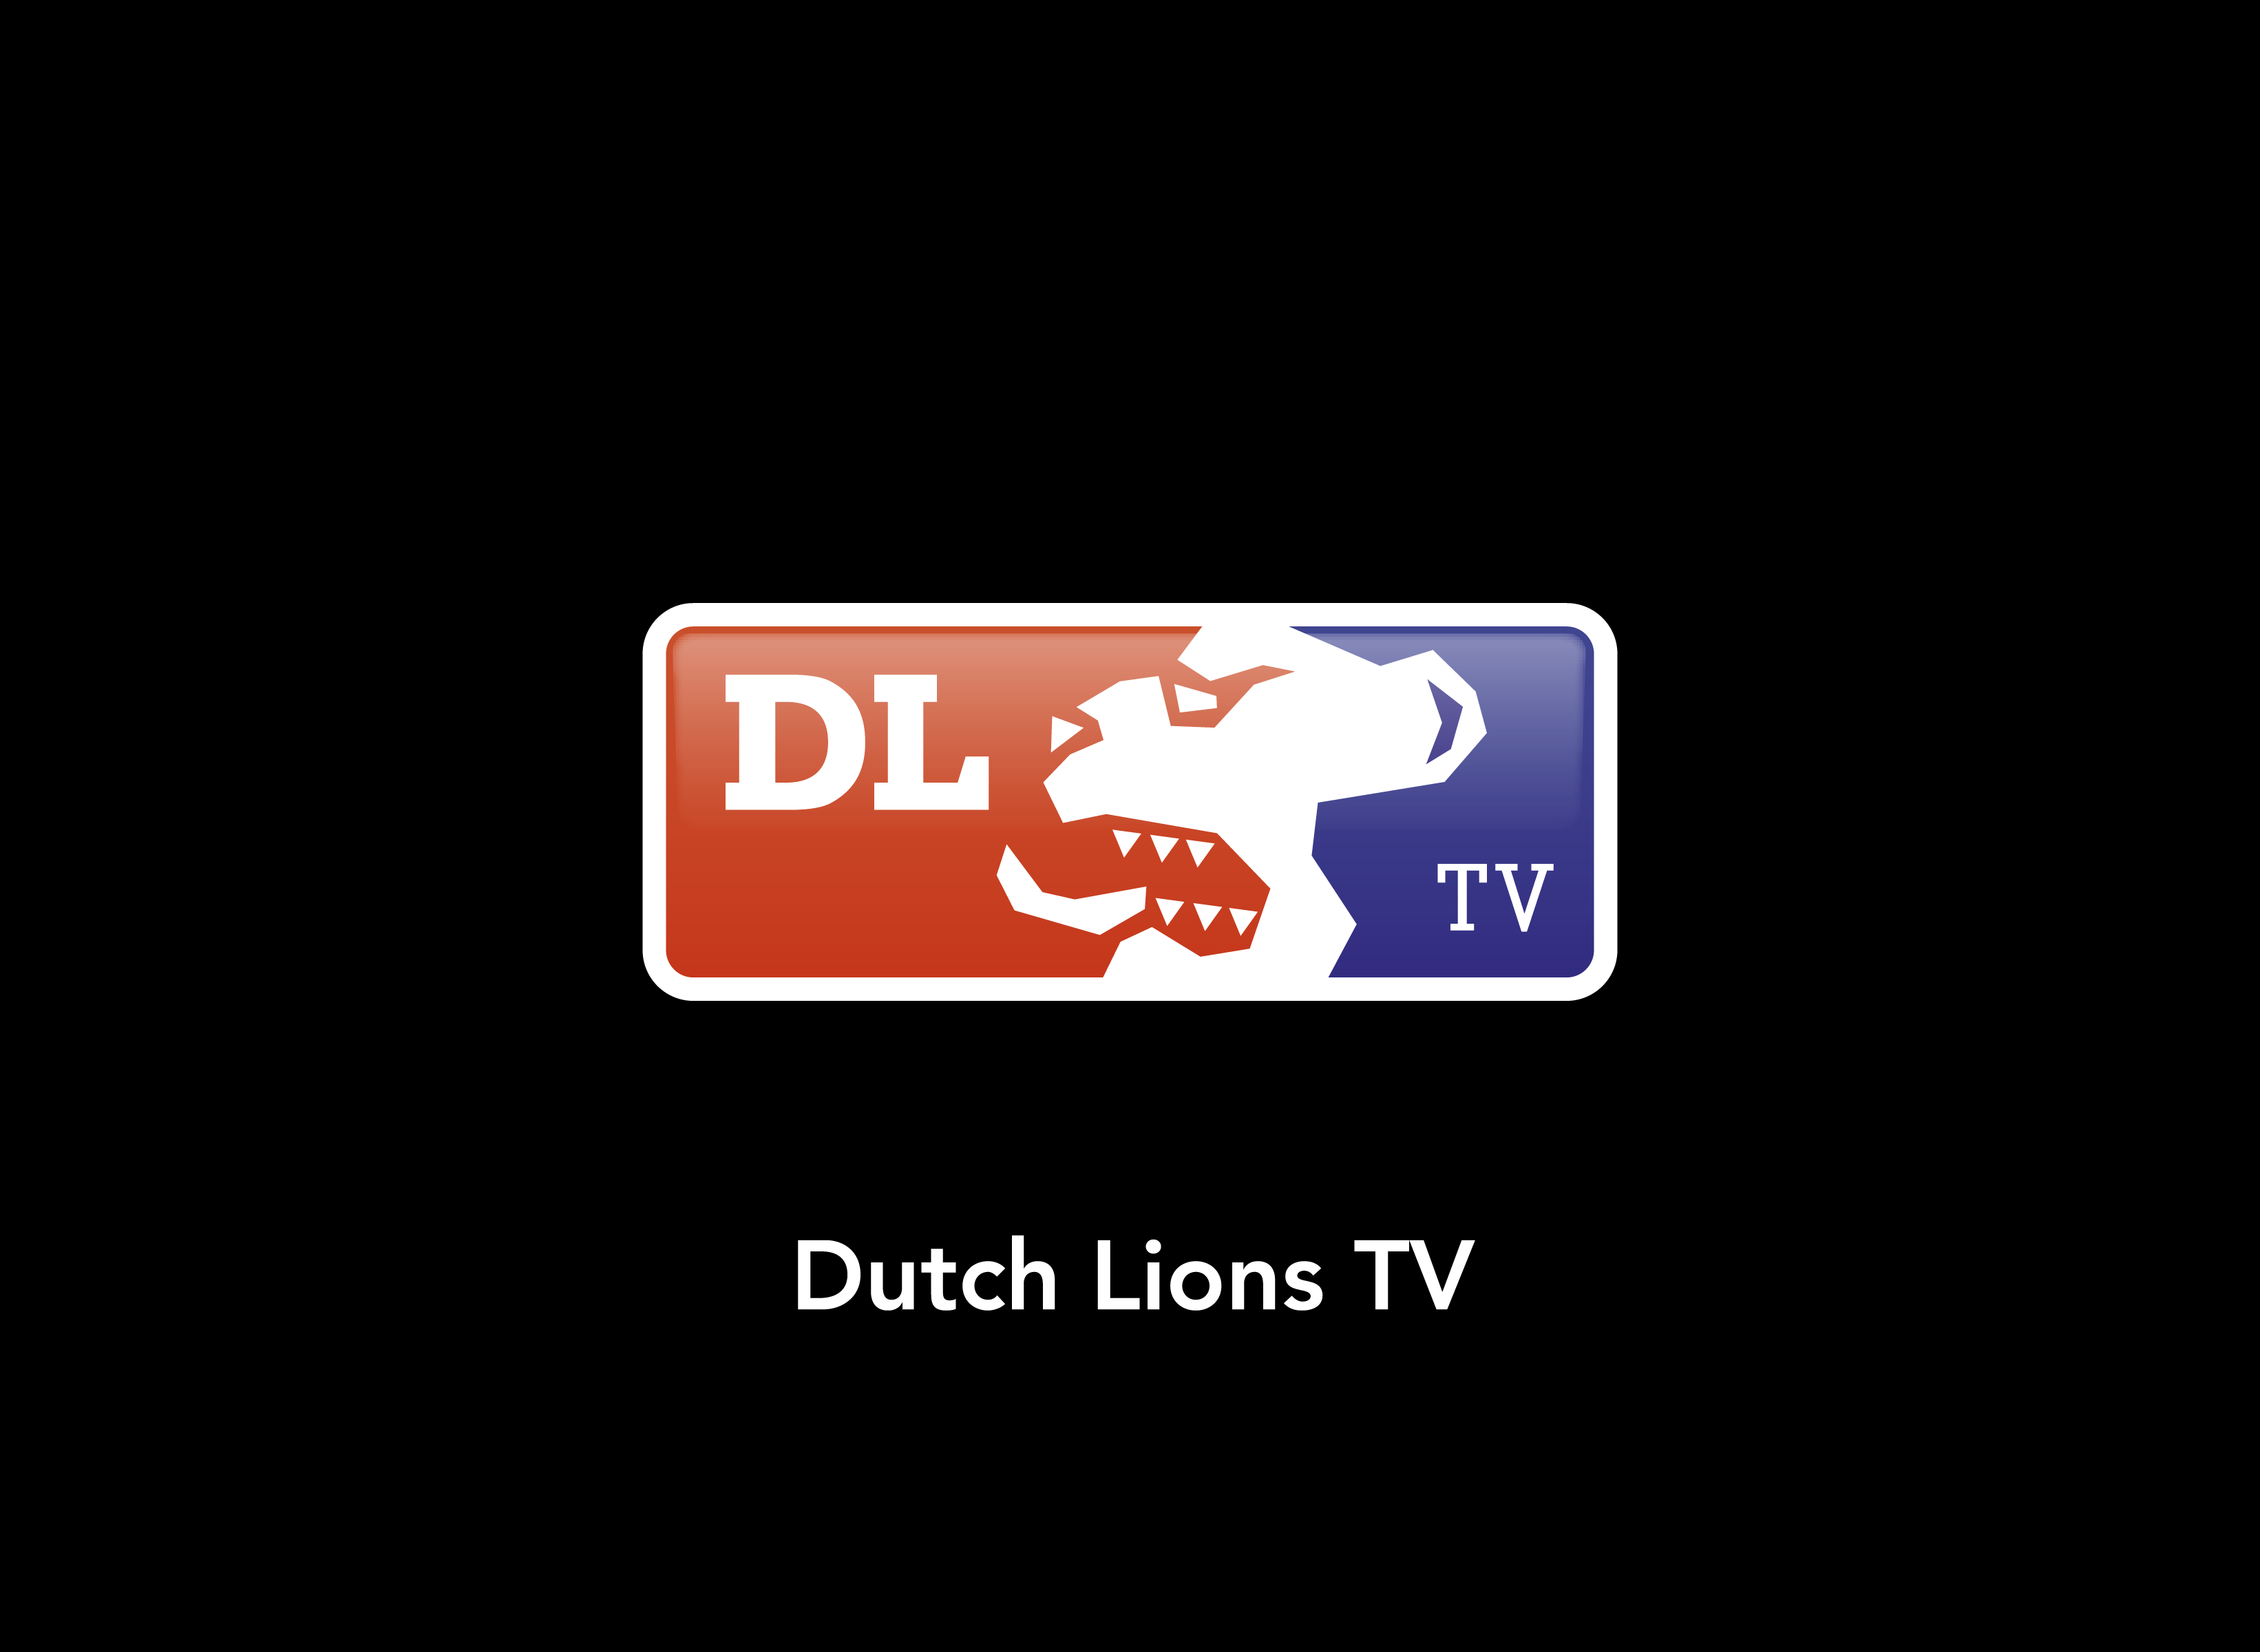 DLTV: USL Pro pre season and first game